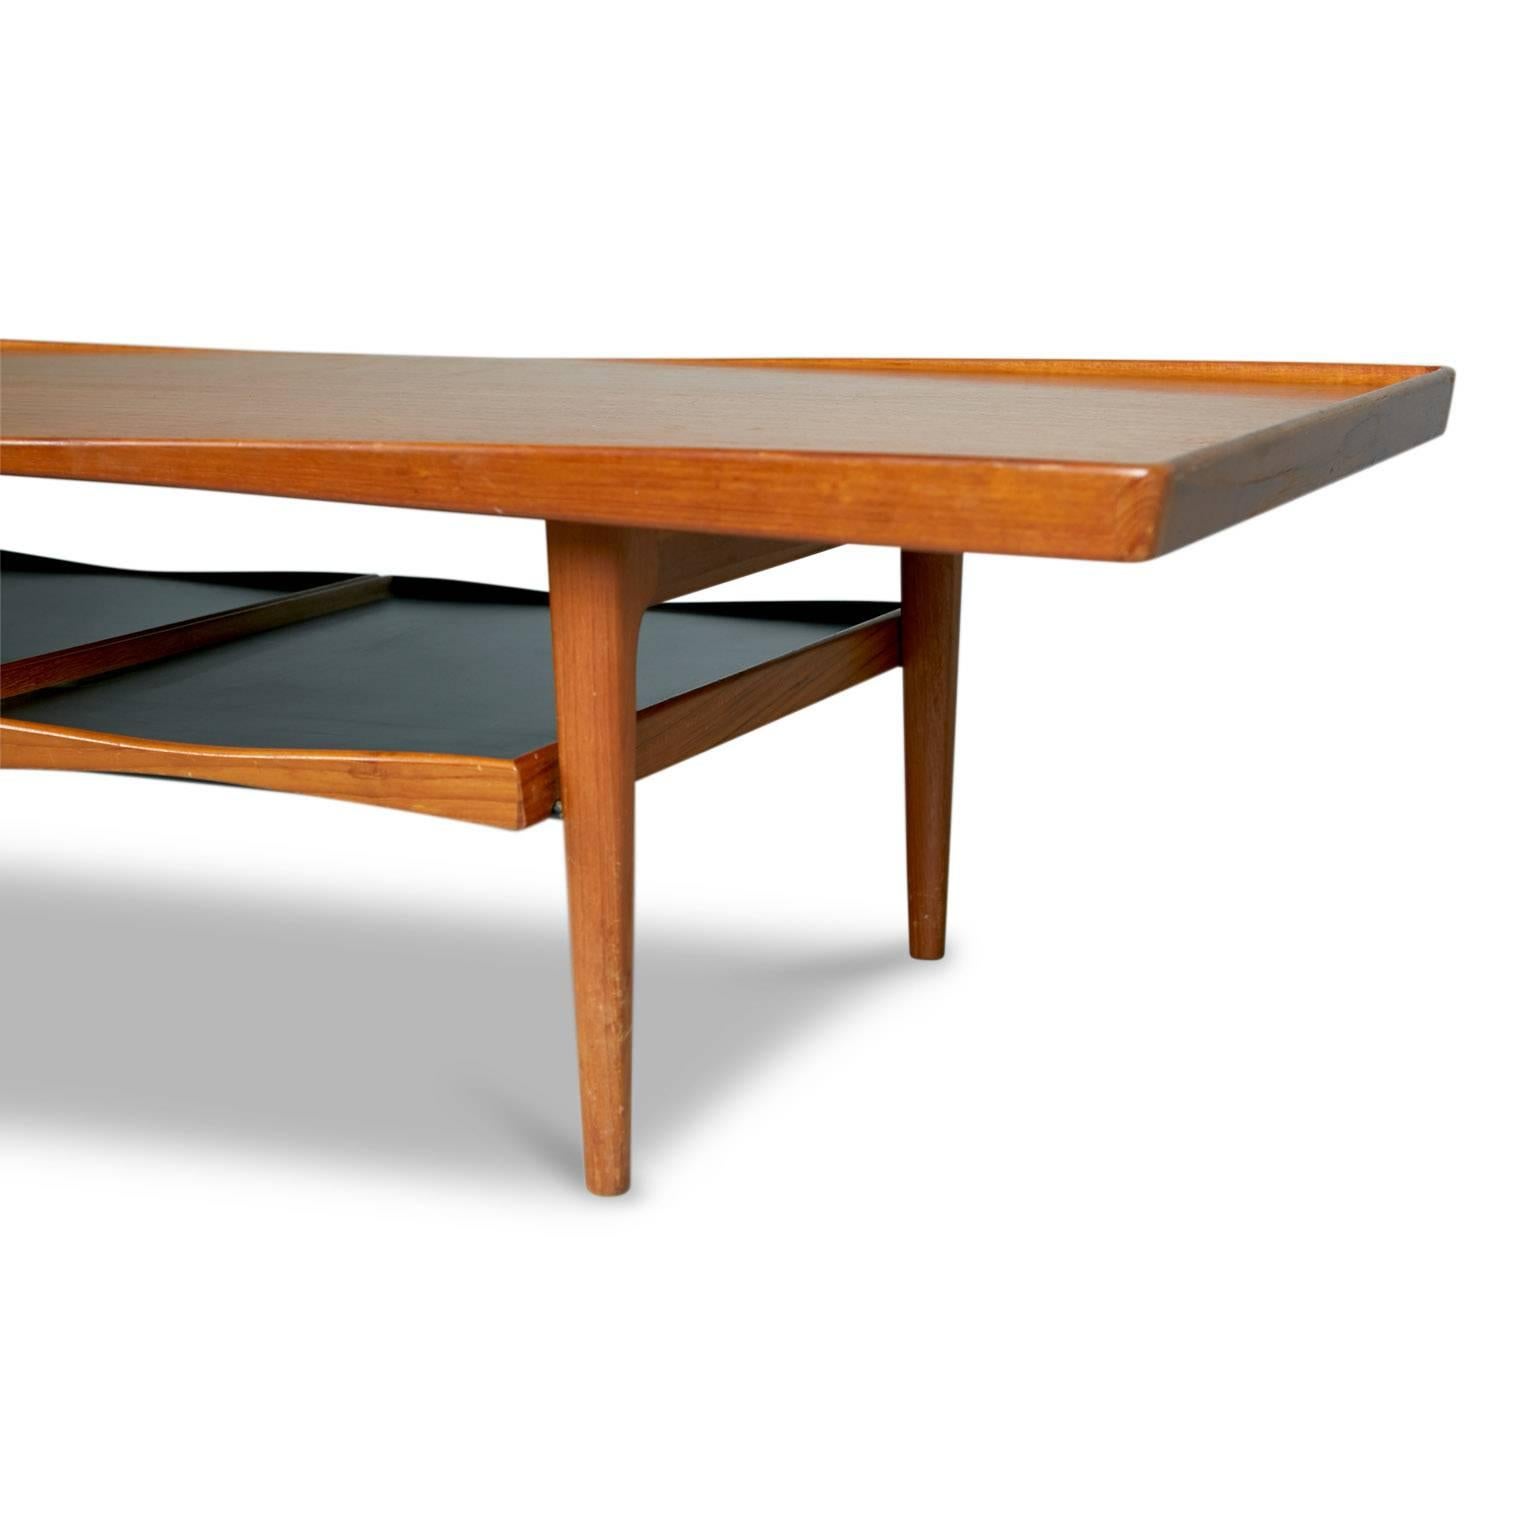 Danish Modern Coffee Table with Removable Trays by Poul Jensen for Selig 1